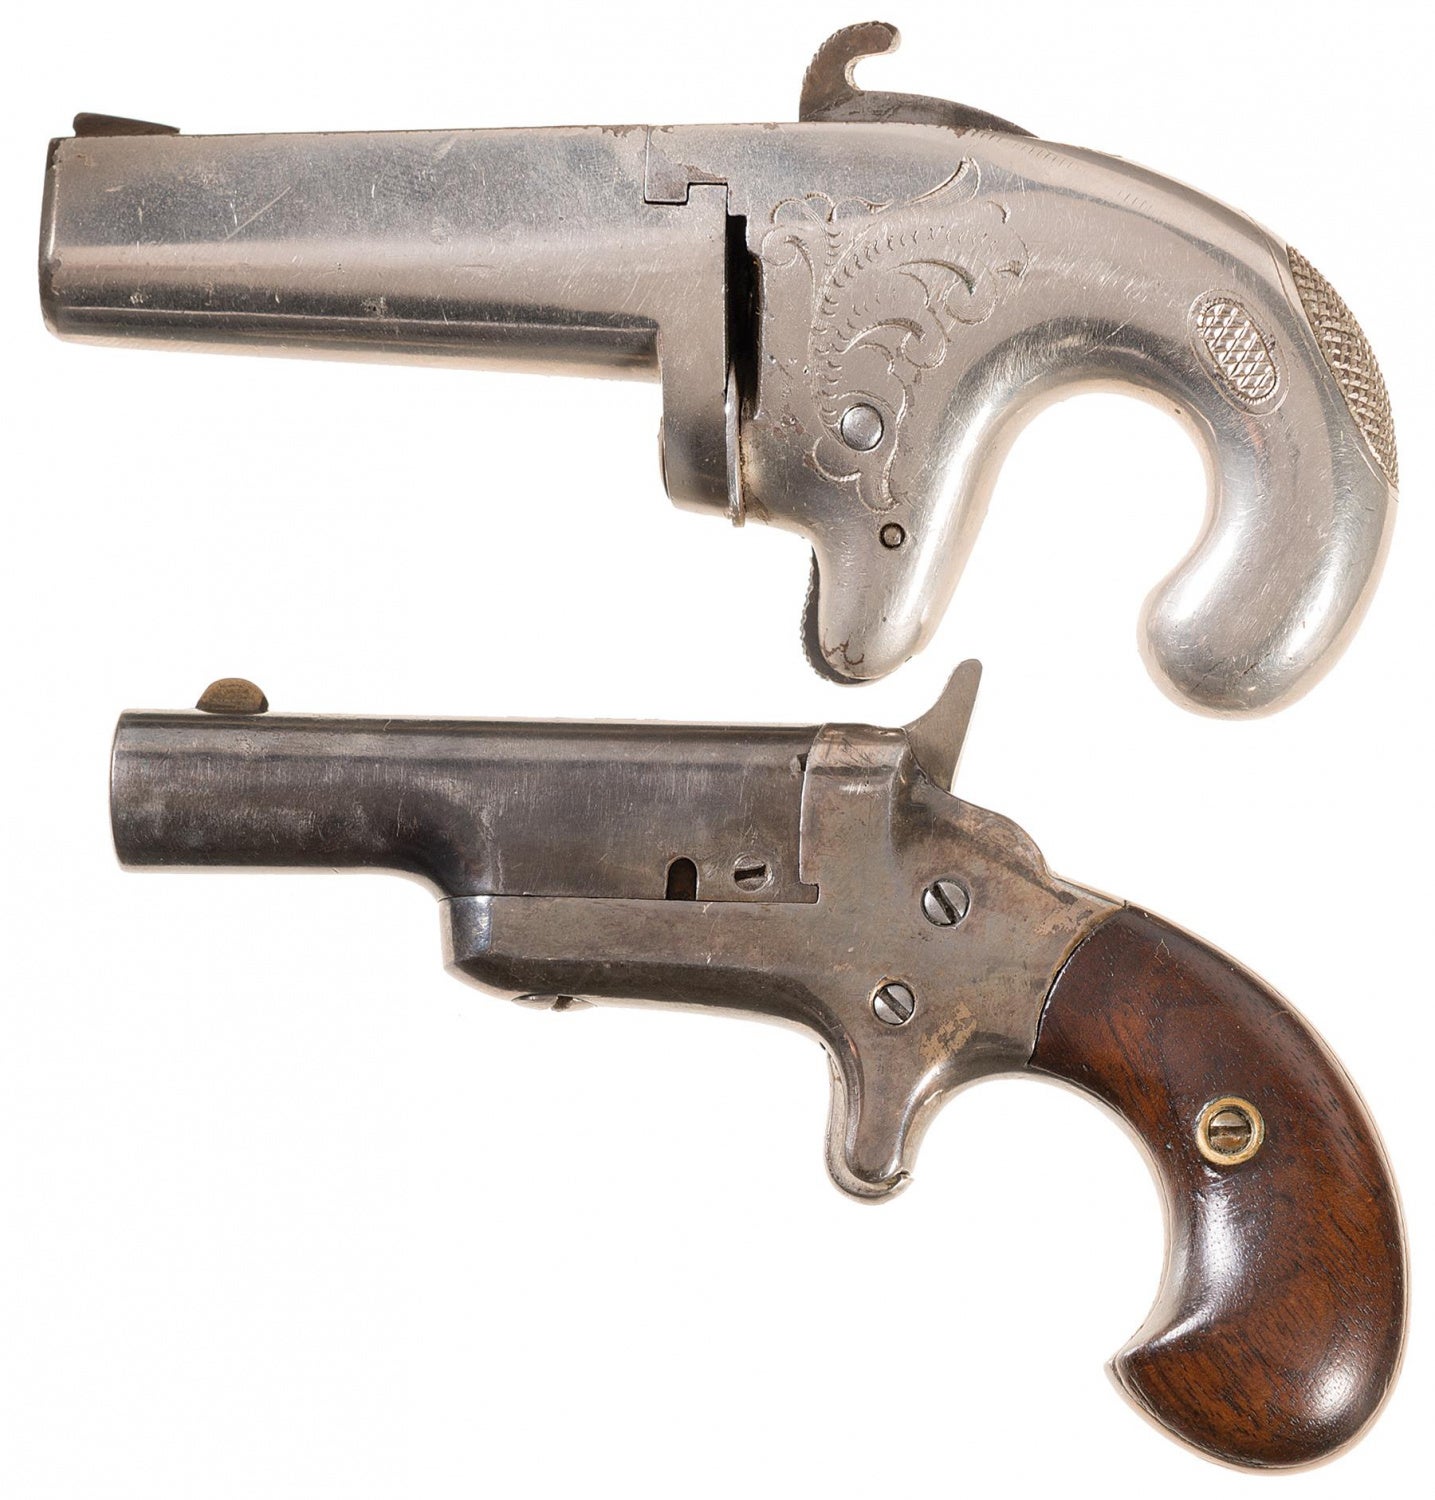 Top: Colt Model 1 Derringer with its rather unique grip Bottom: Colt Model 3 Derringer with bird's head grip Image Credit: Rock Island Auctions